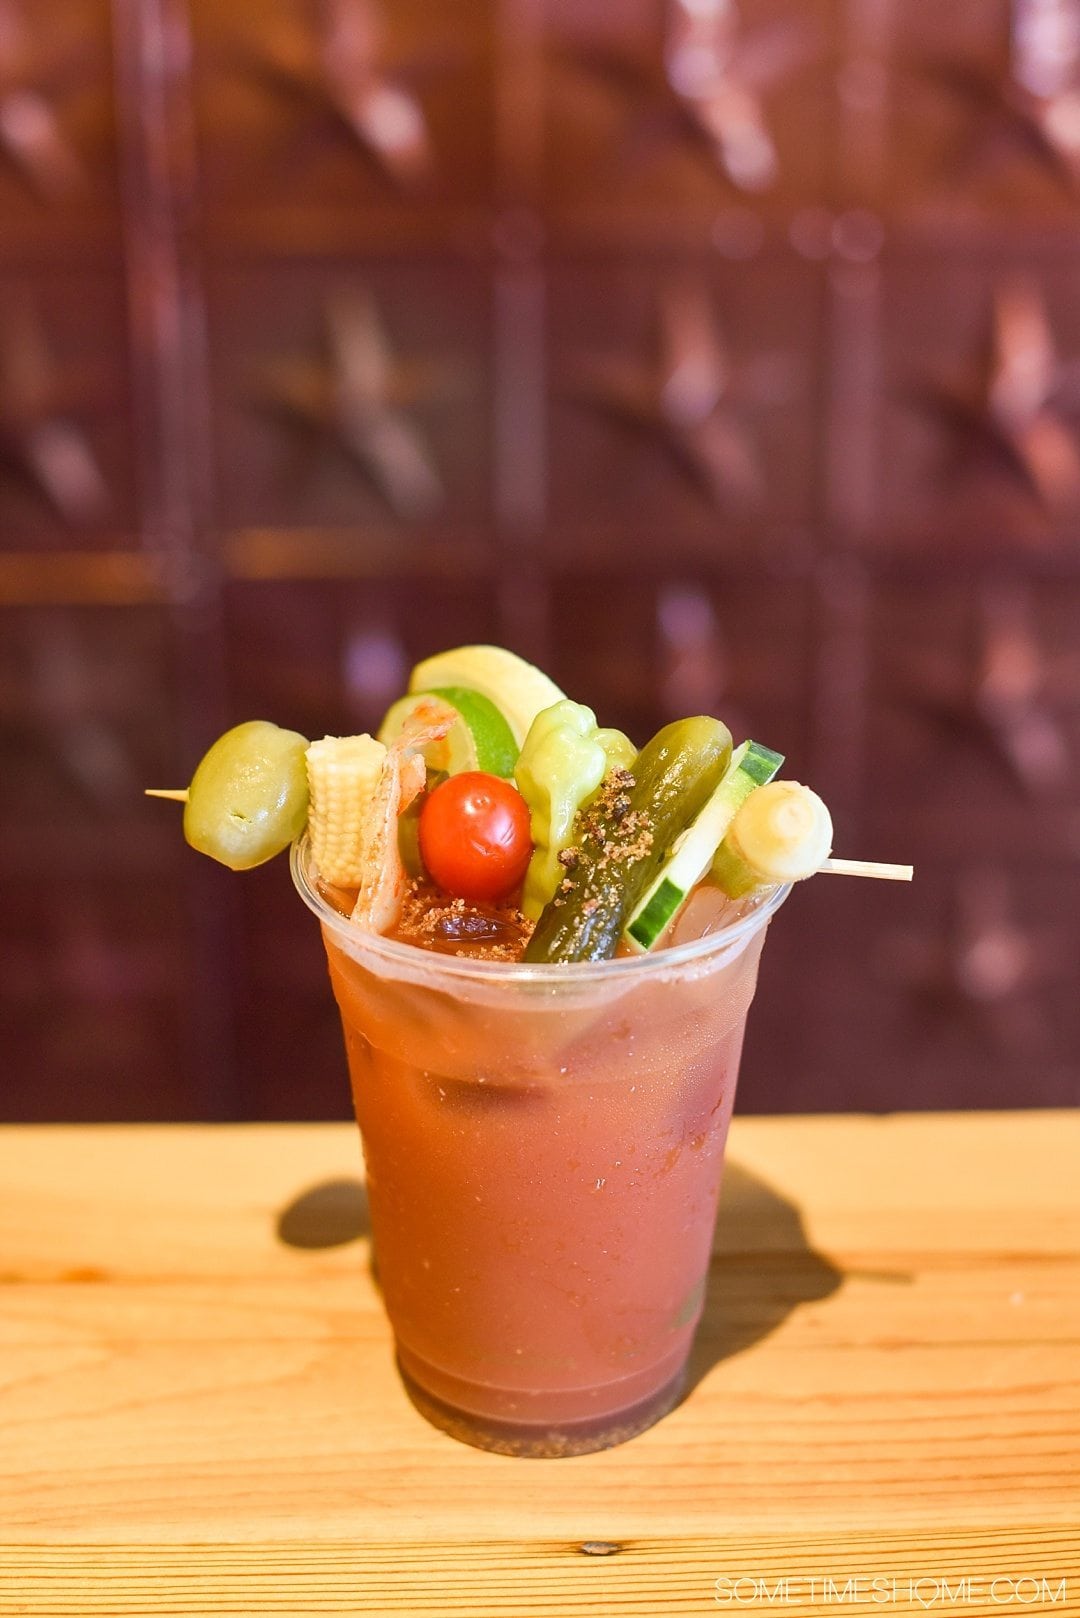 PickleFest at The Rickhouse in Durham. Photos and advice by Sometimes Home travel blog. Bloody Mary bar, pickled cucumbers, bamboo, peaches and more.